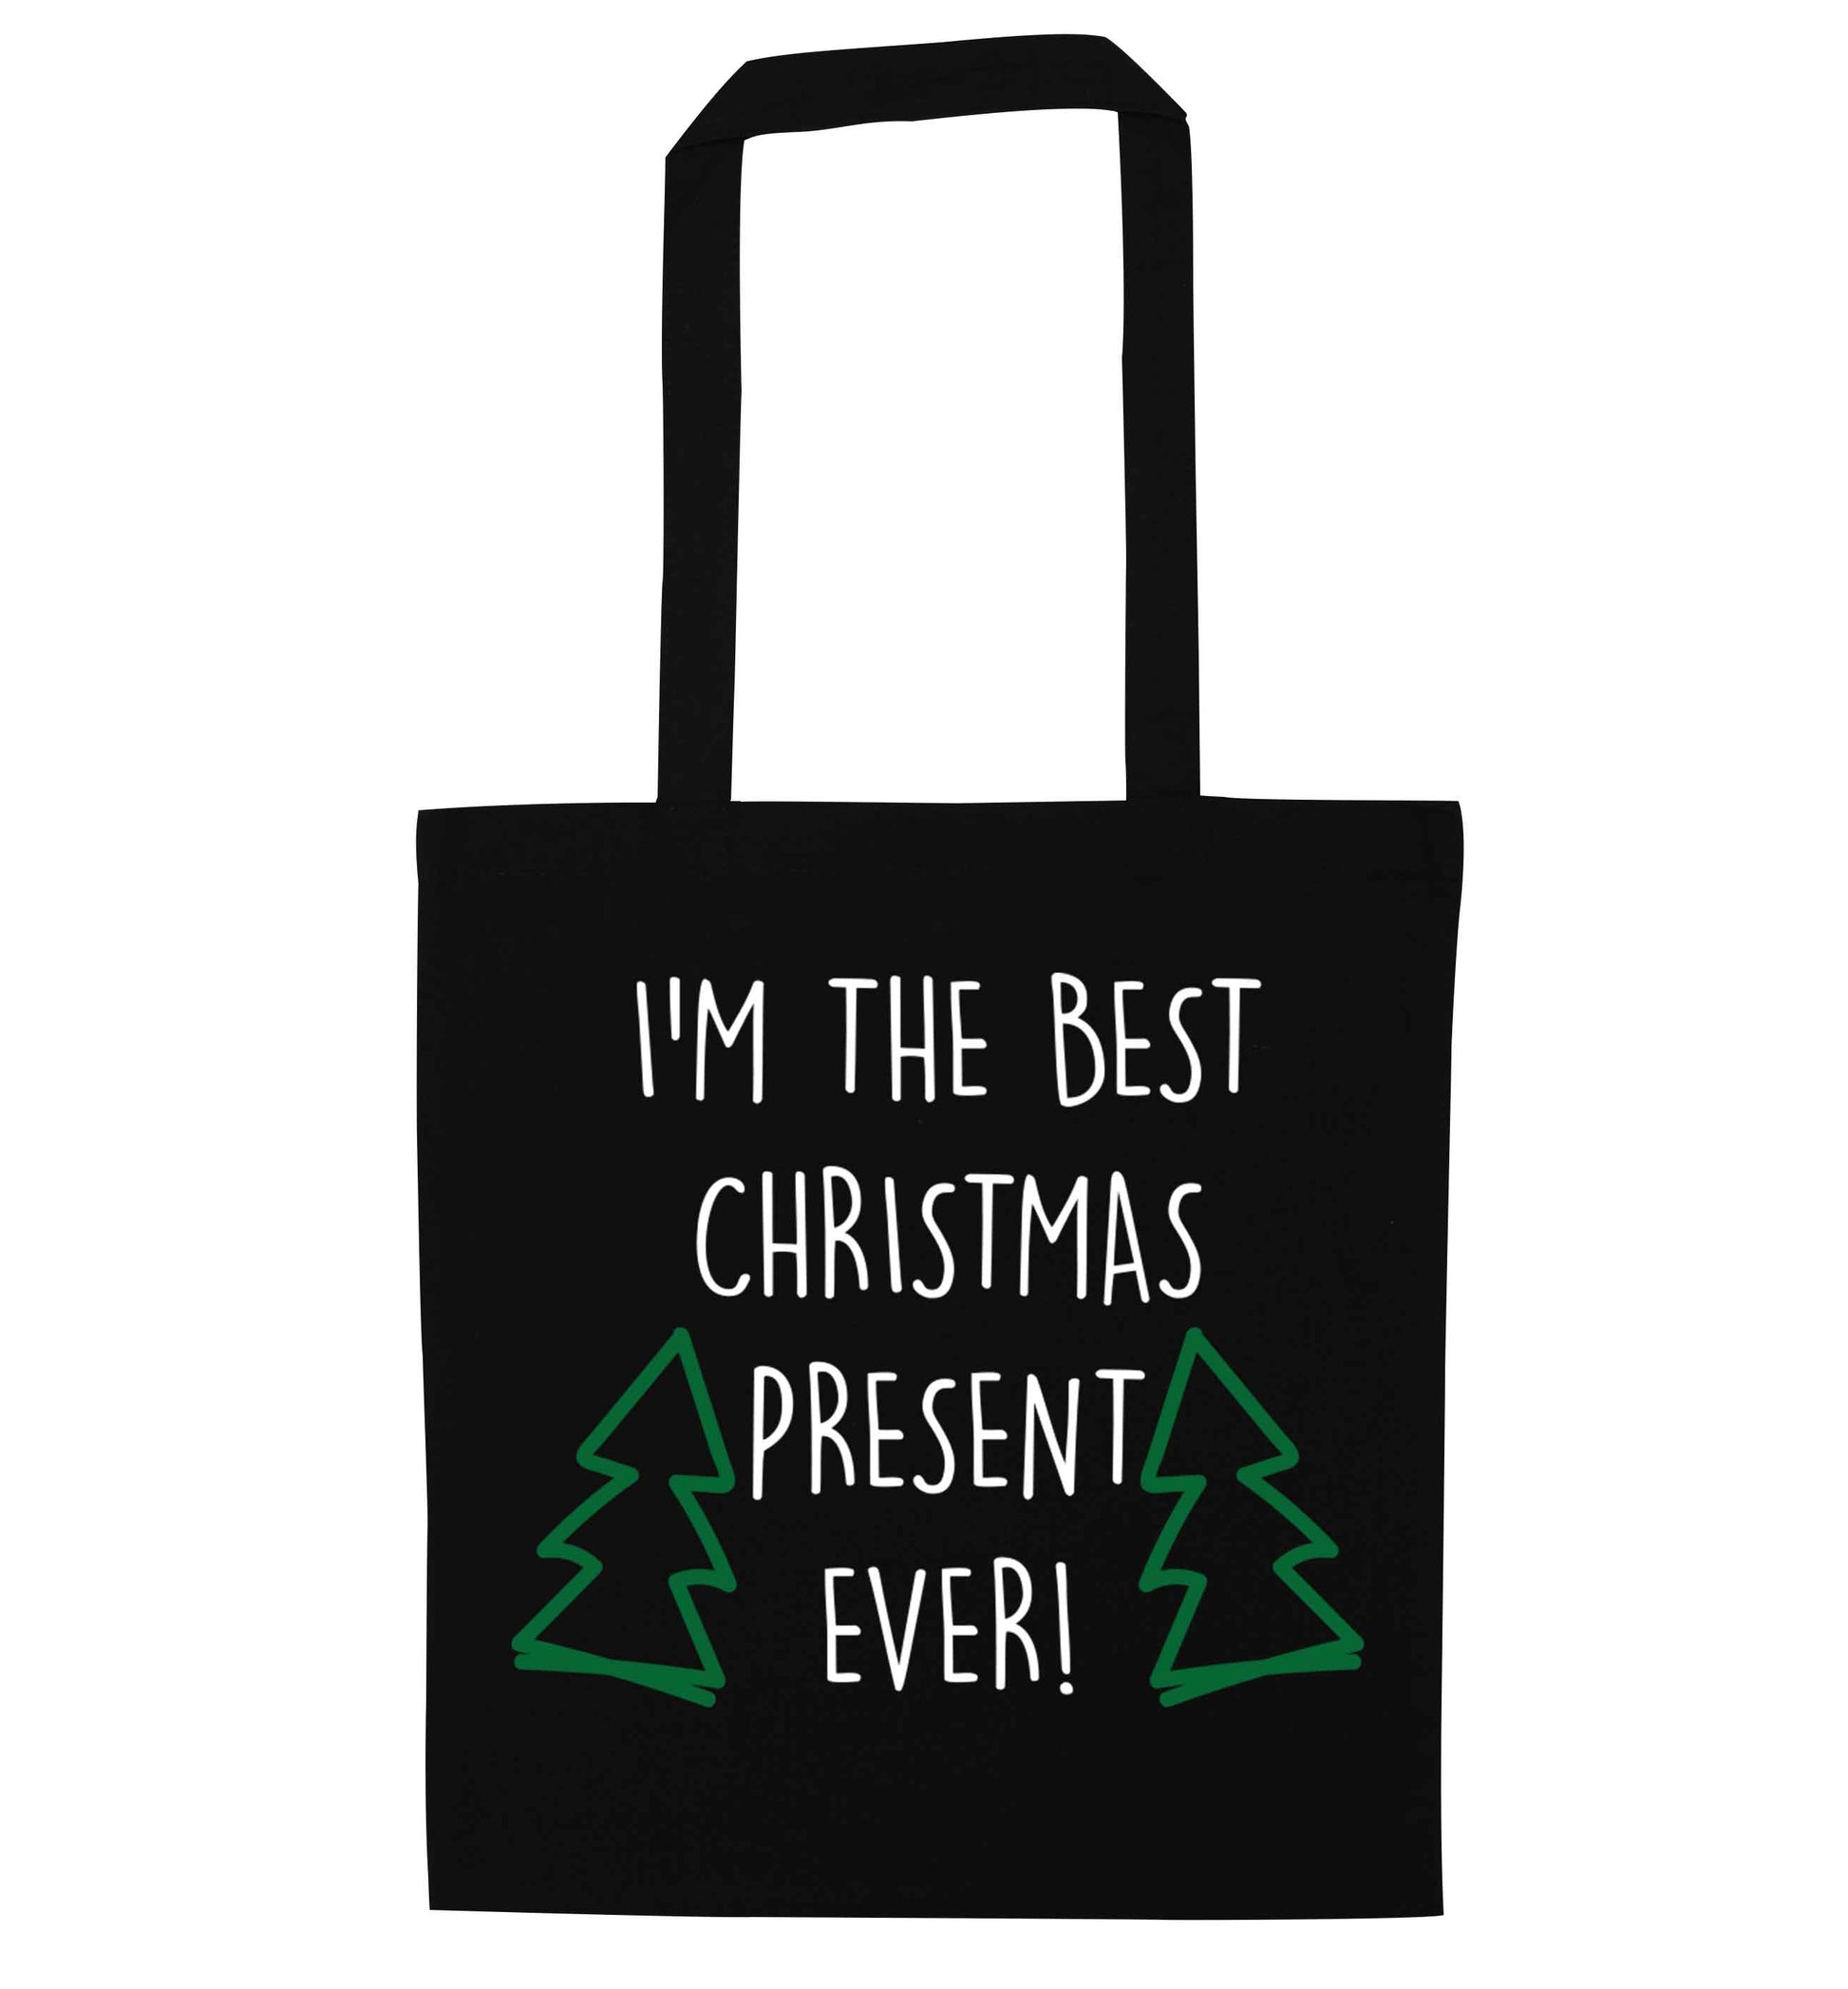 I'm the best Christmas present ever black tote bag